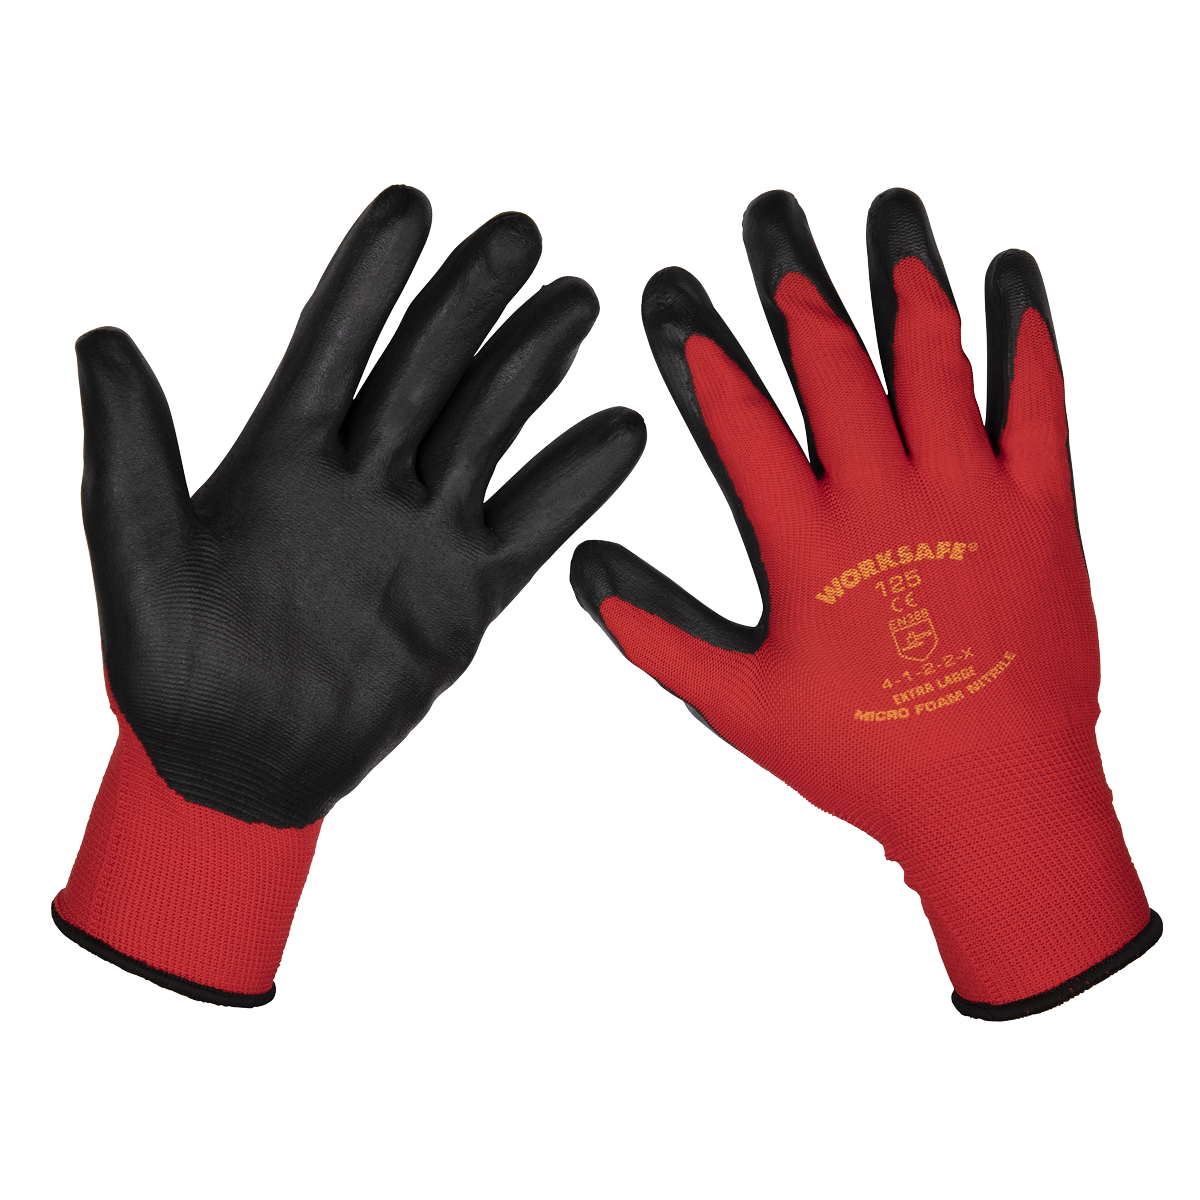 Sealey Nitrile Foam Gloves (X-Large) - Pack of 120 Pairs 9125XL/B120